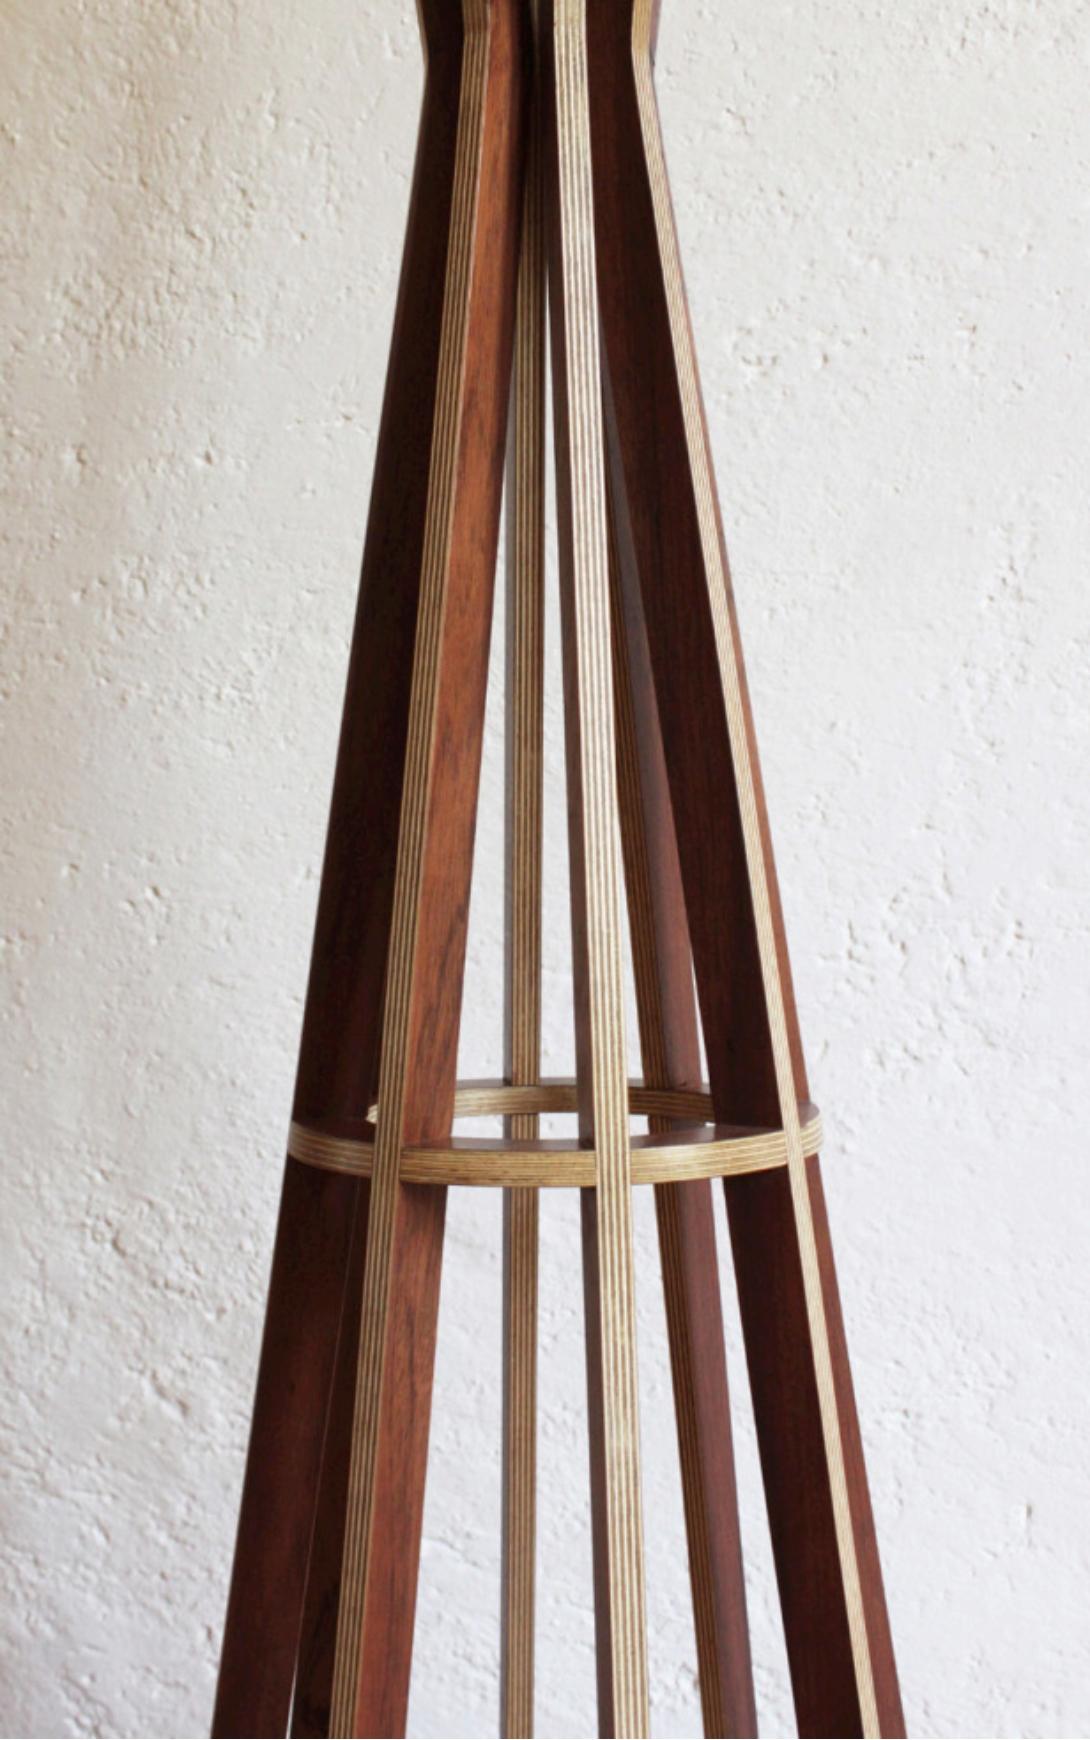 Modern Core Coat Rack by Maria Beckmann, Represented by Tuleste Factory For Sale